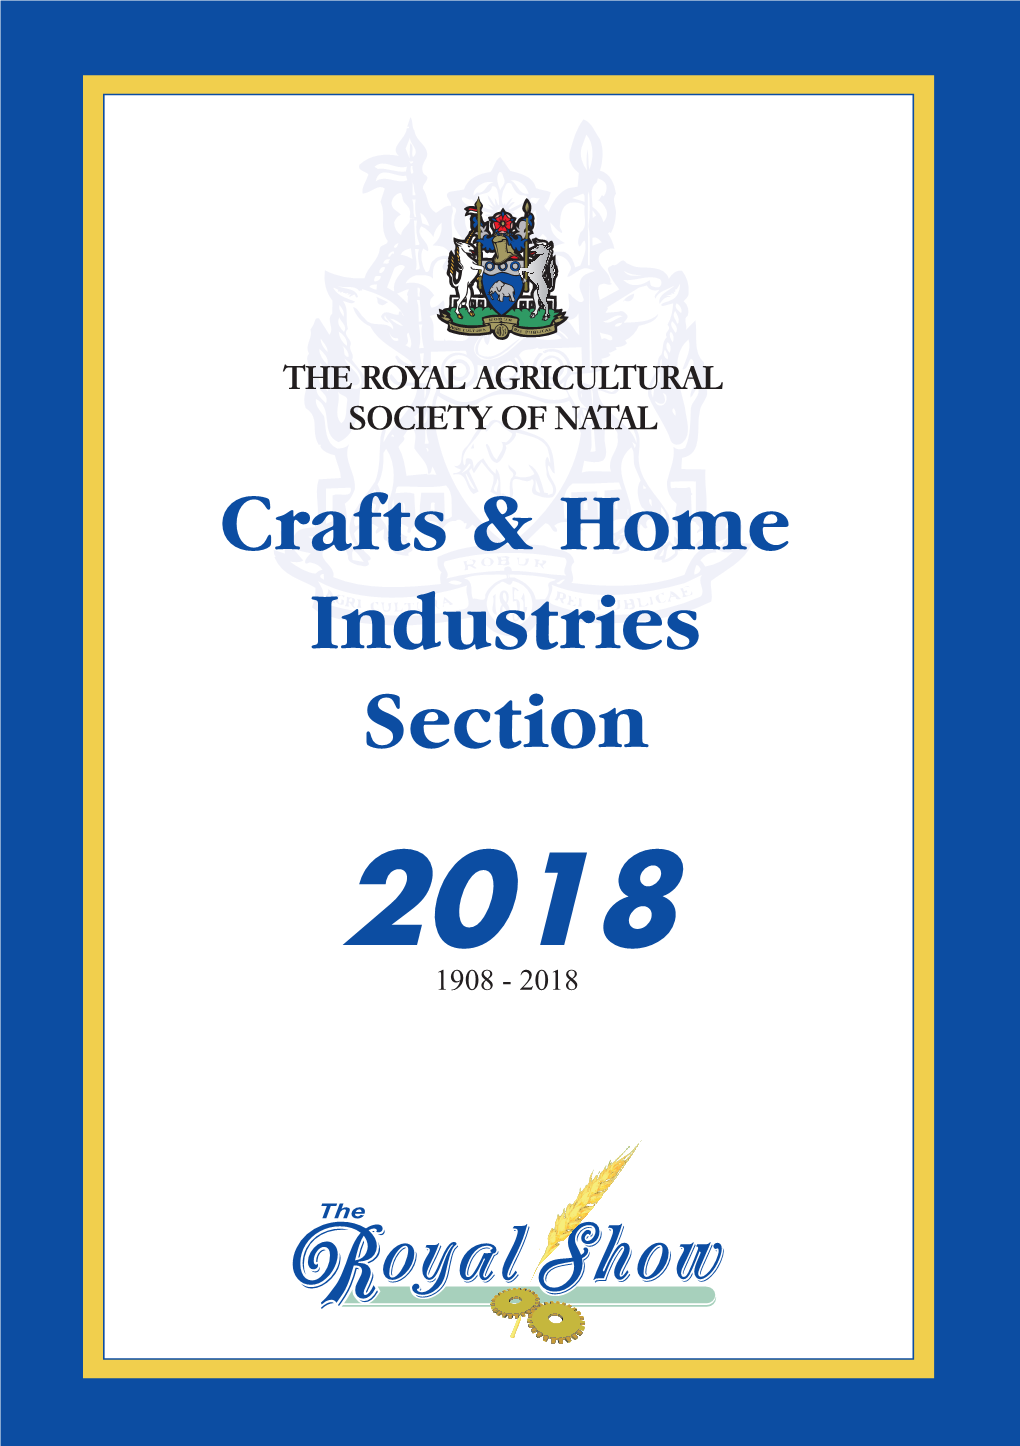 Crafts & Home Industries Section